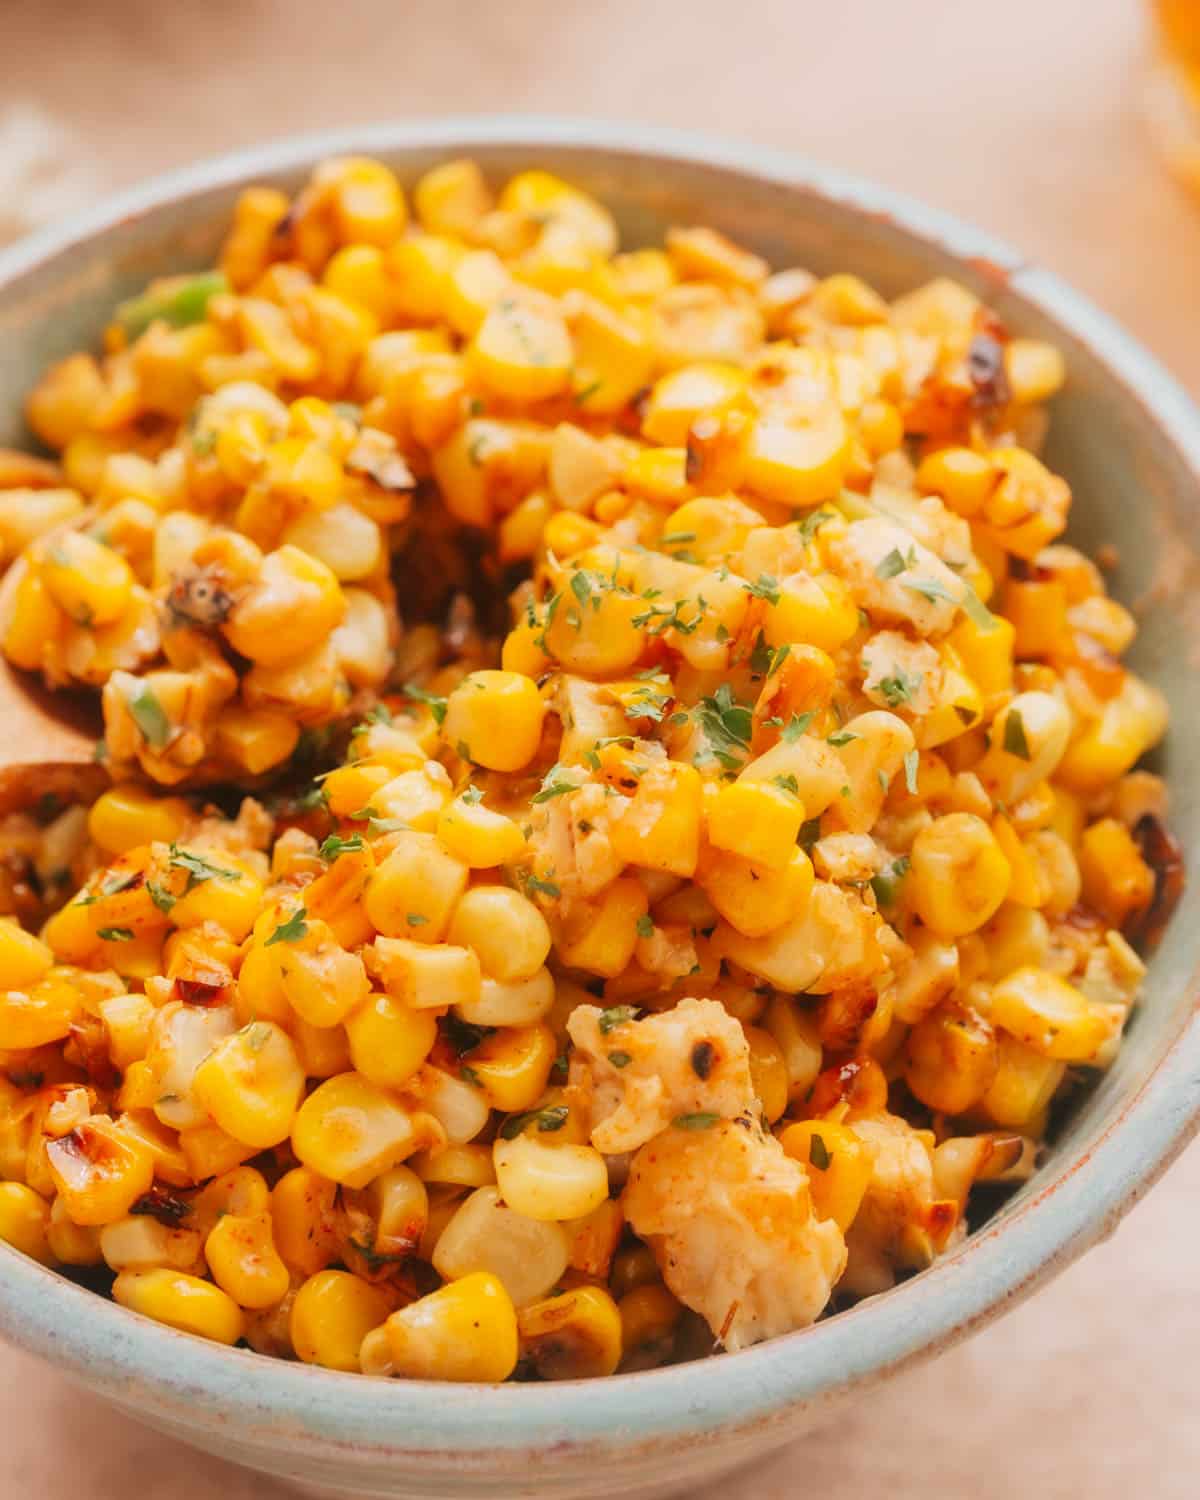 A bowl of Mexican Corn in Cup Street Corn Salad (Esquites) garnished with fresh cilantro.